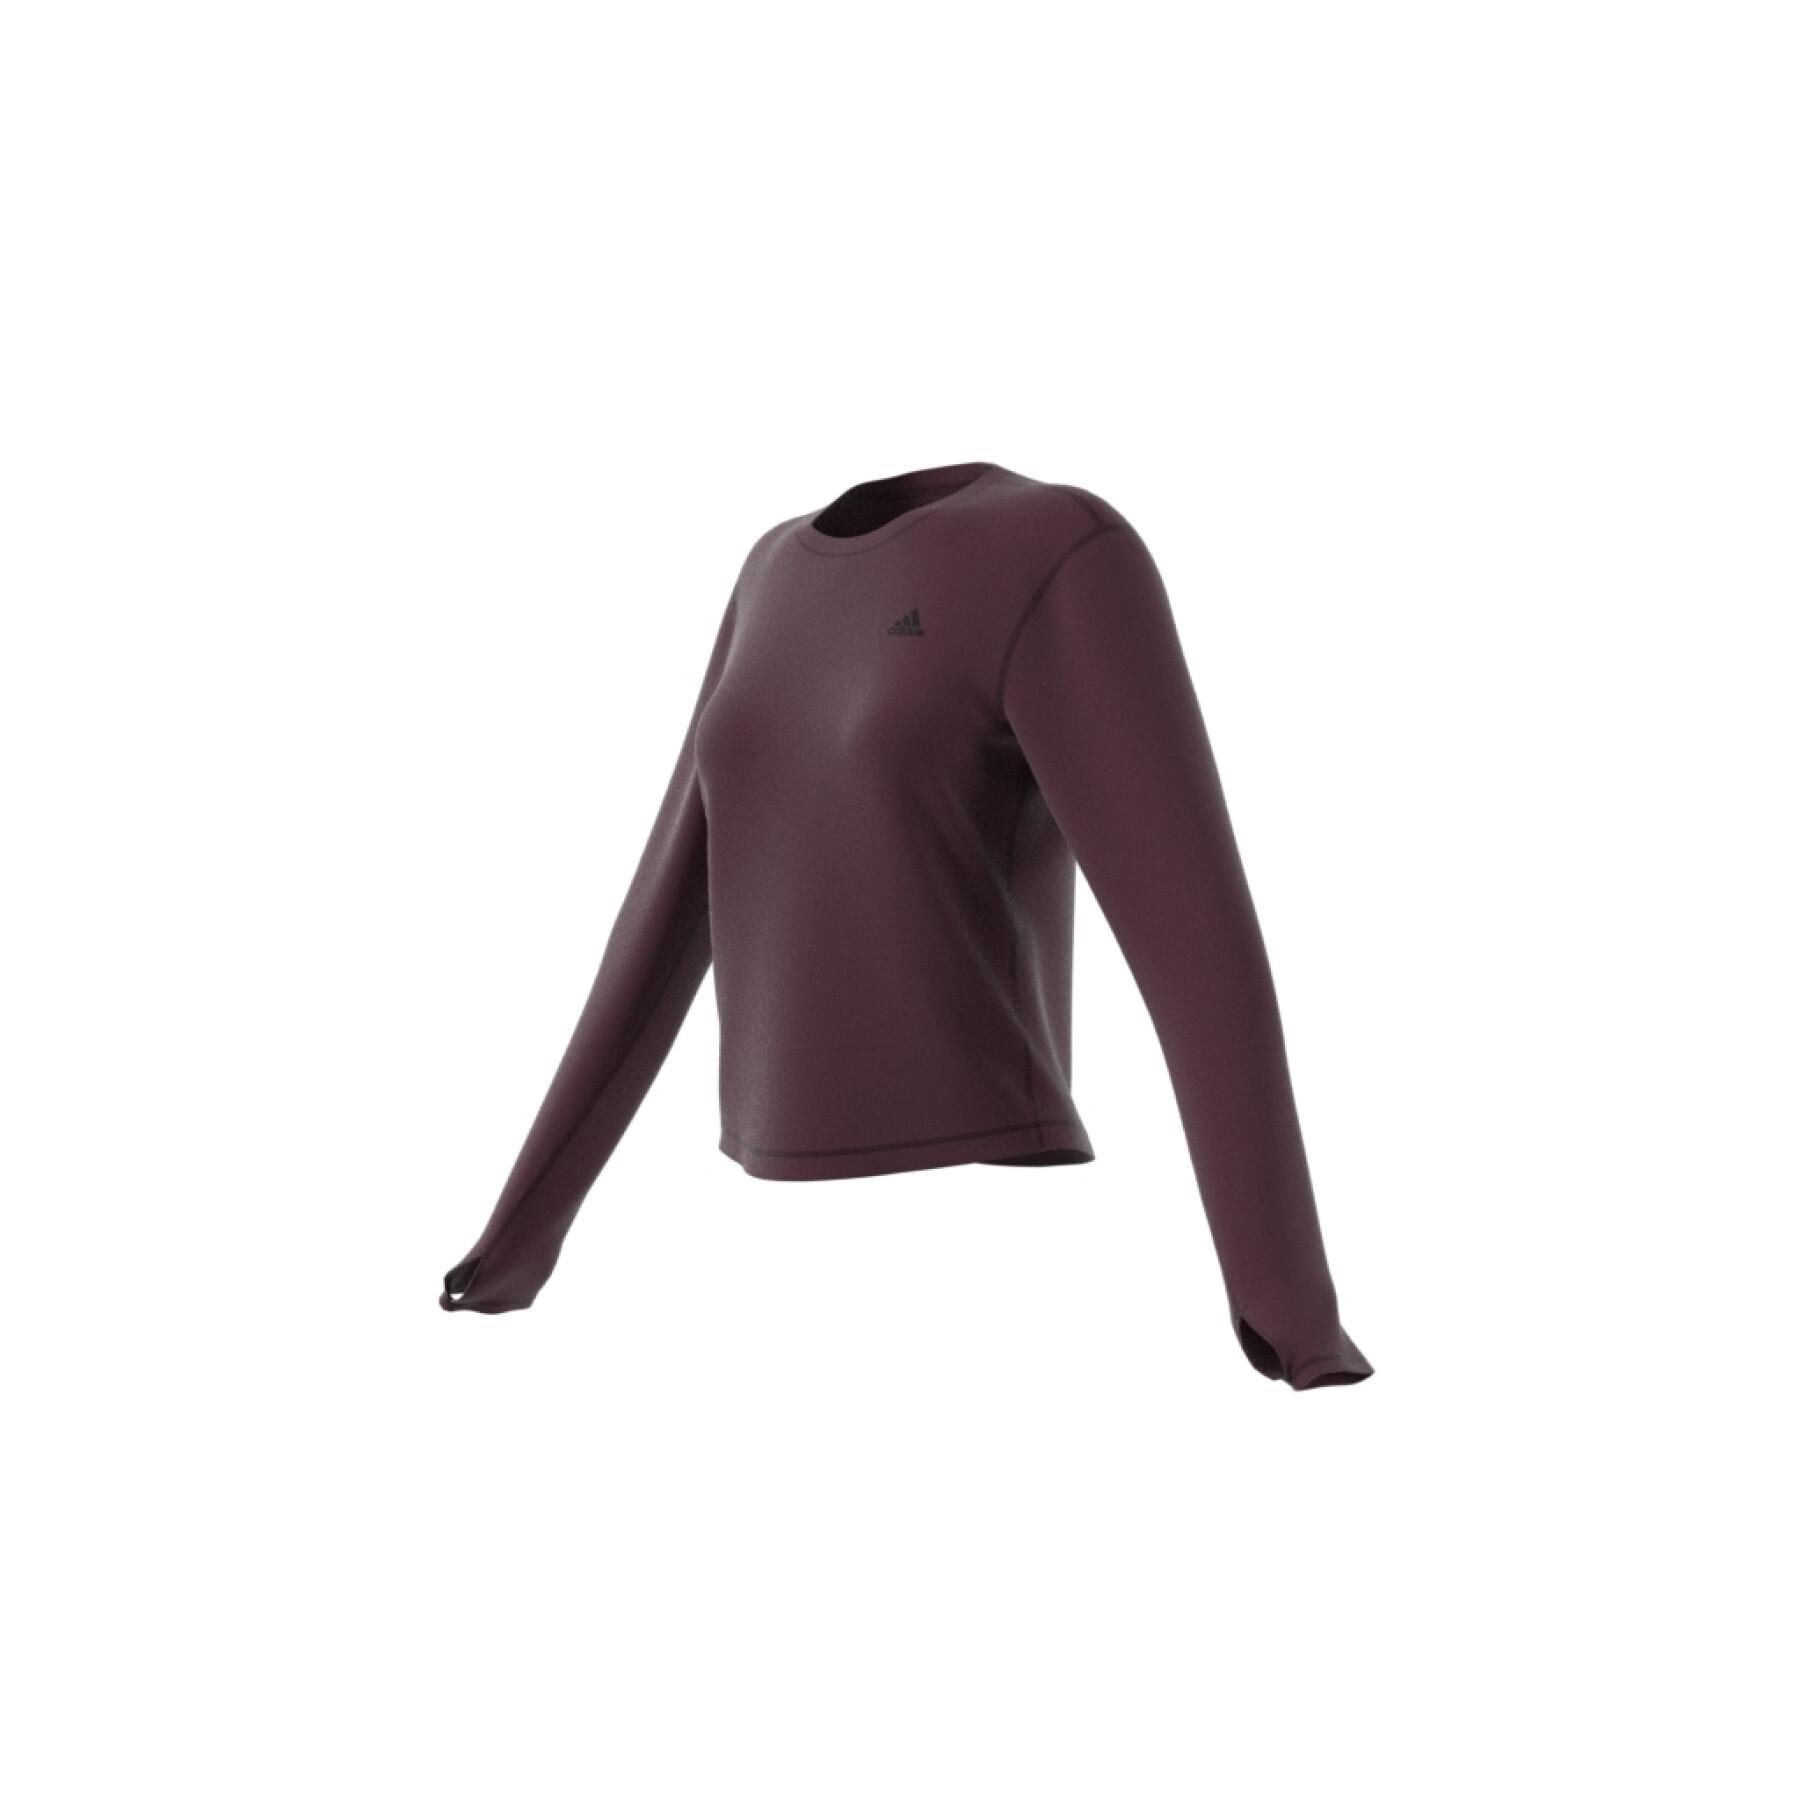 Women's long sleeve jersey adidas Run icons made with nature